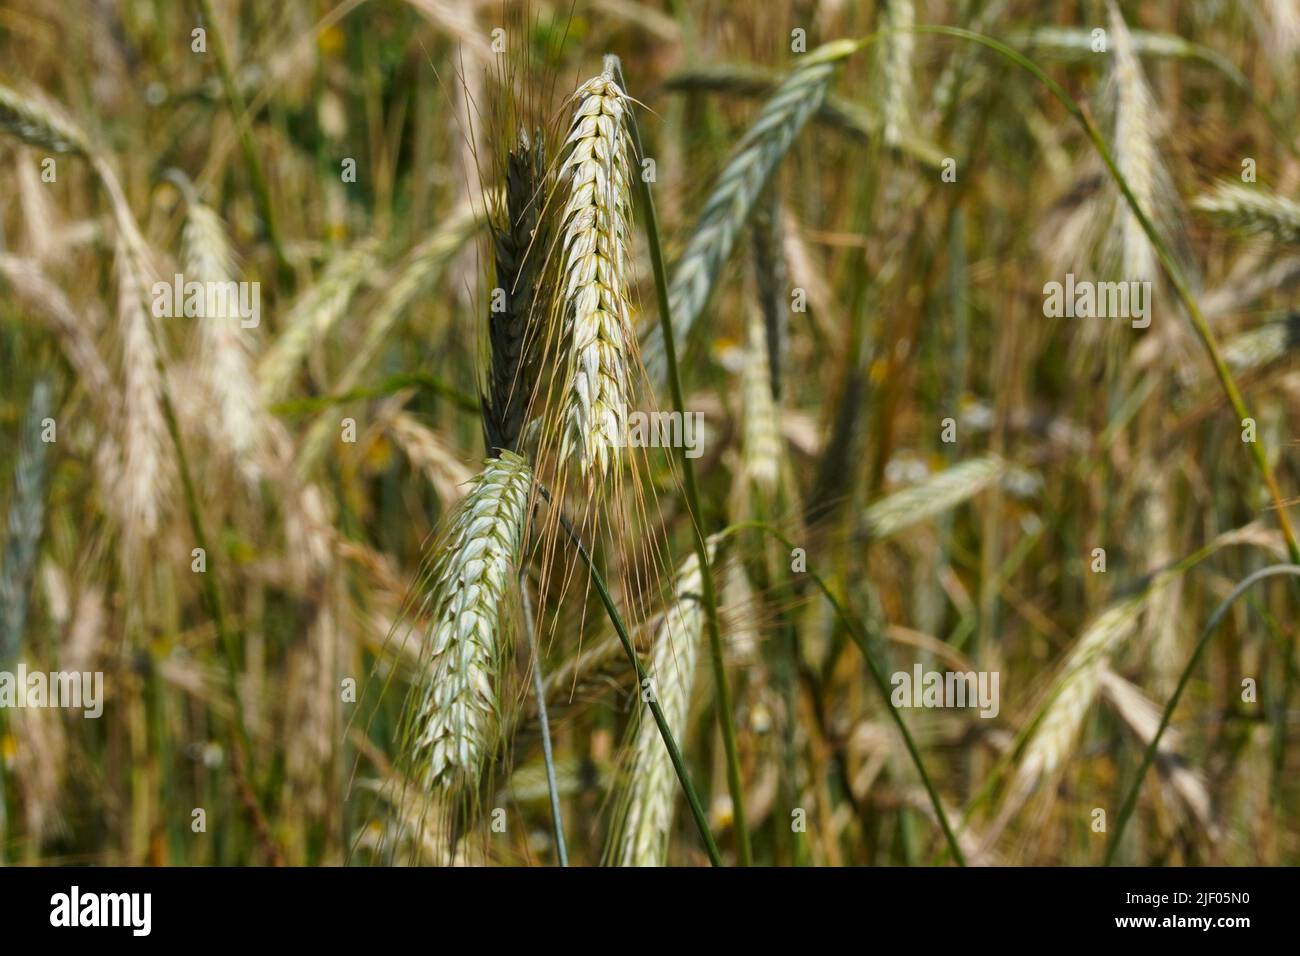 Selective focus on the grains of rye growng in a field Stock Photo